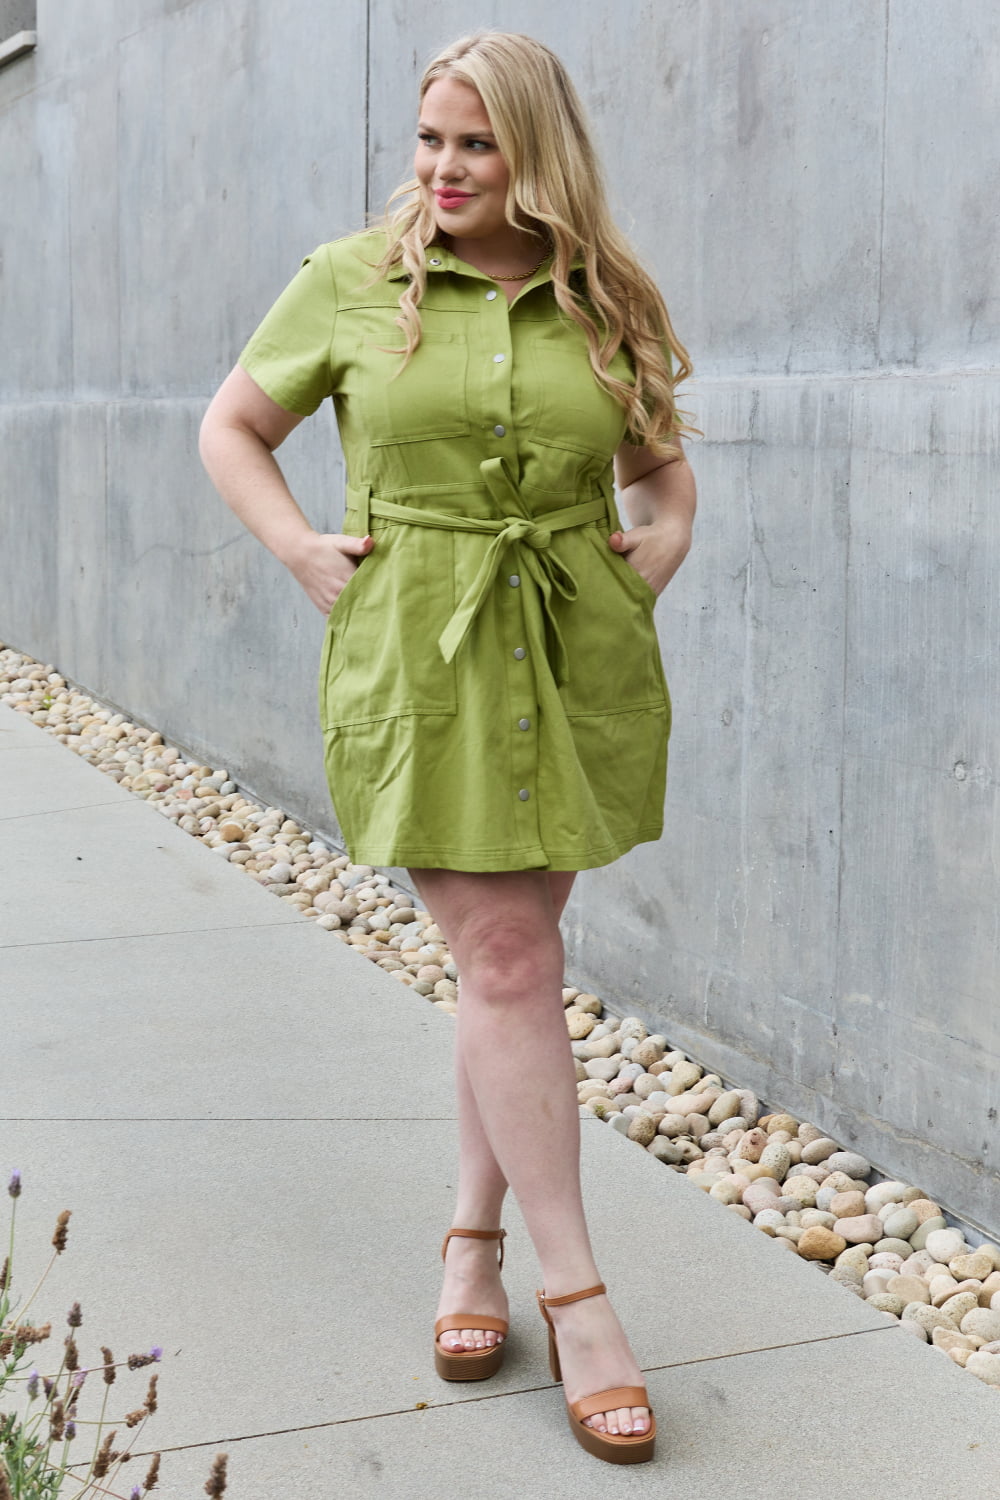 JADE BY JANE Stick With Me Button Down Dress in Lime